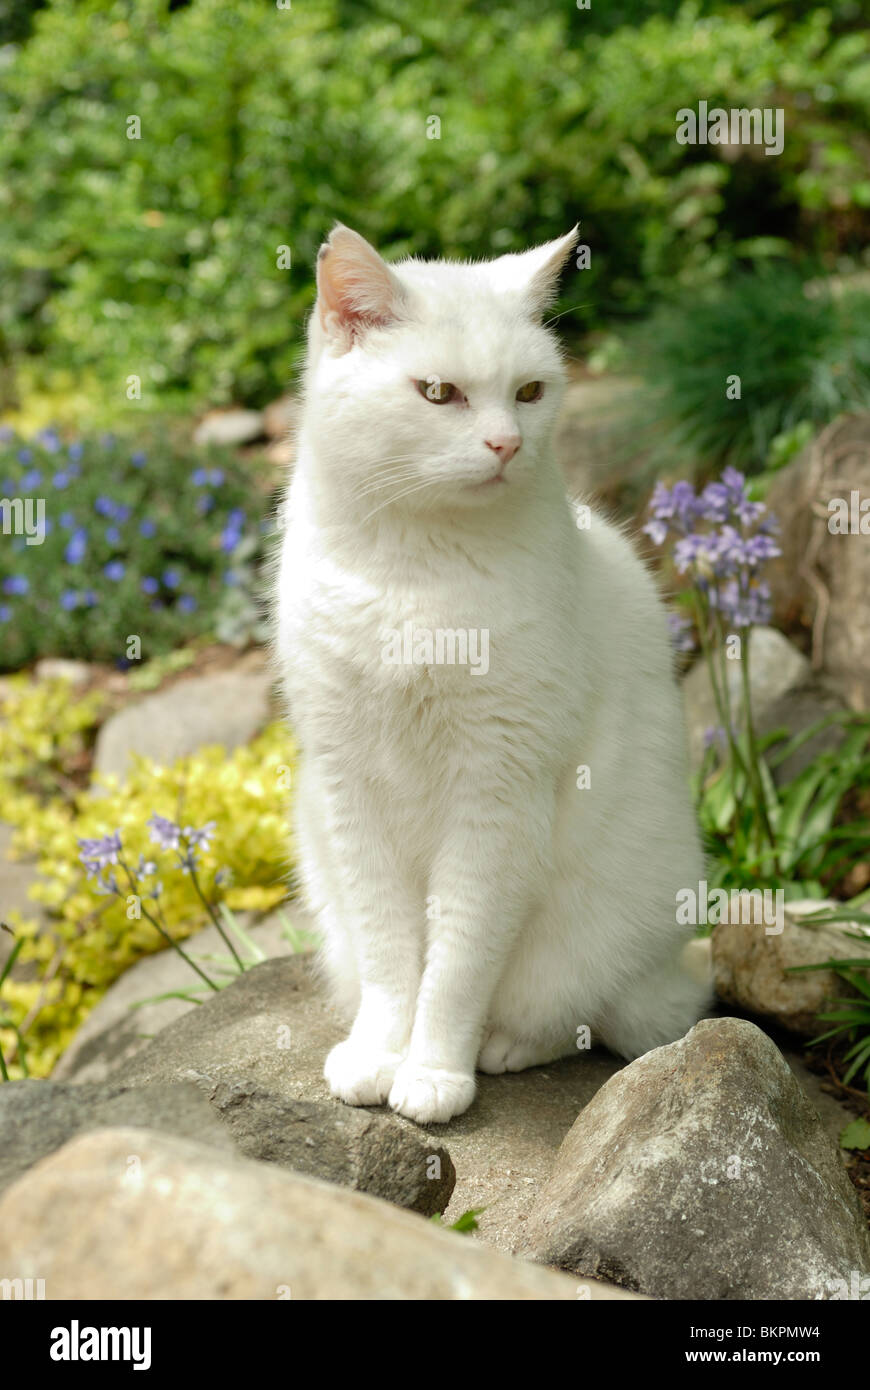 All White domestic Cat sitting on a rock in a garden. Stock Photo